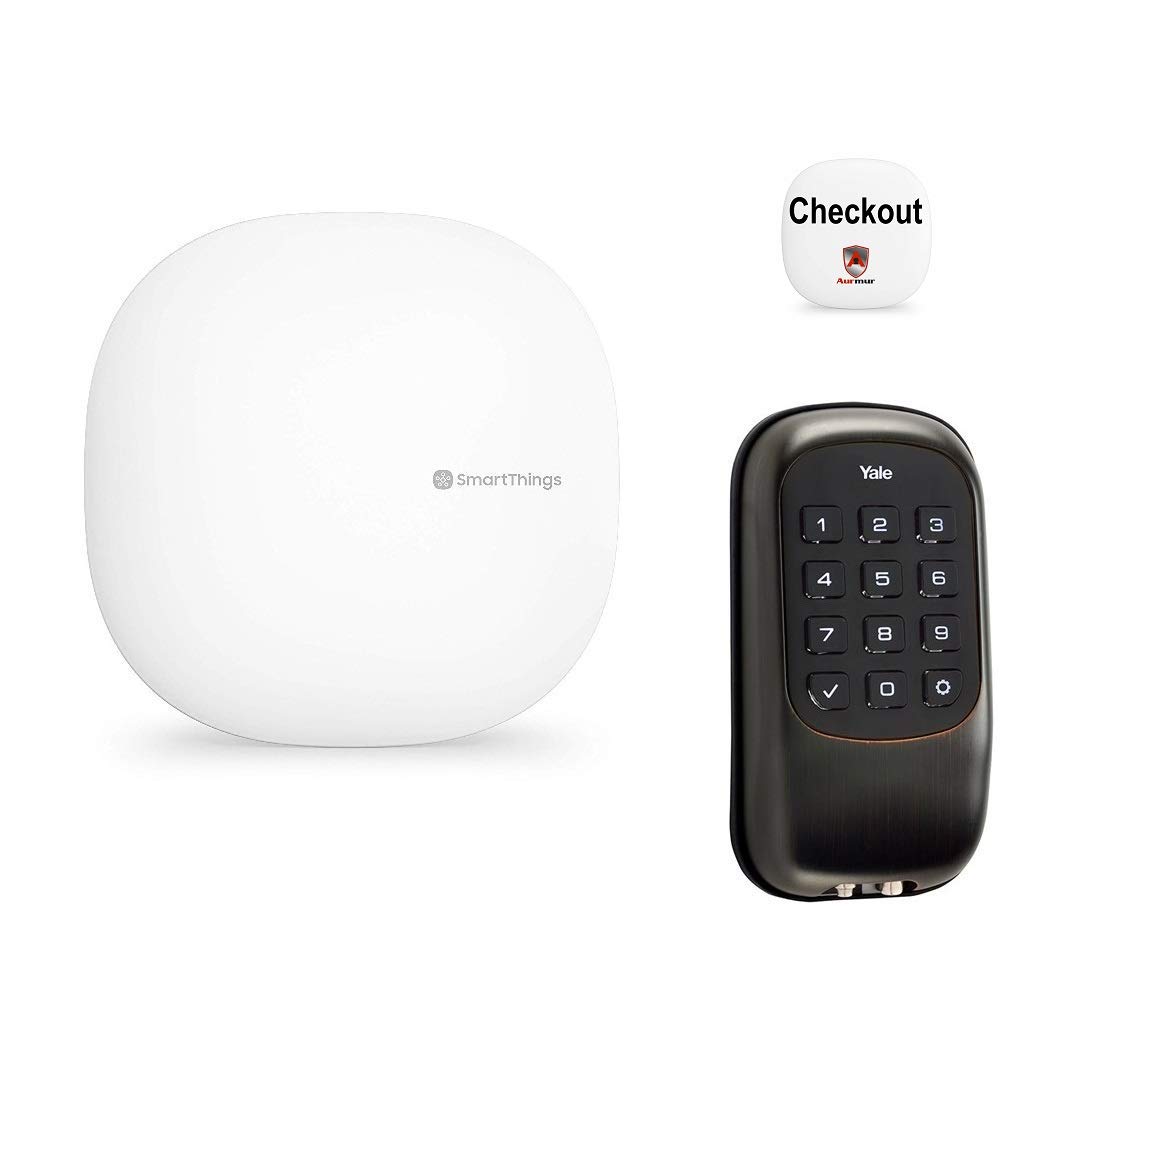 Samsung and Yale Aurmur Smart Lock and Checkout Button